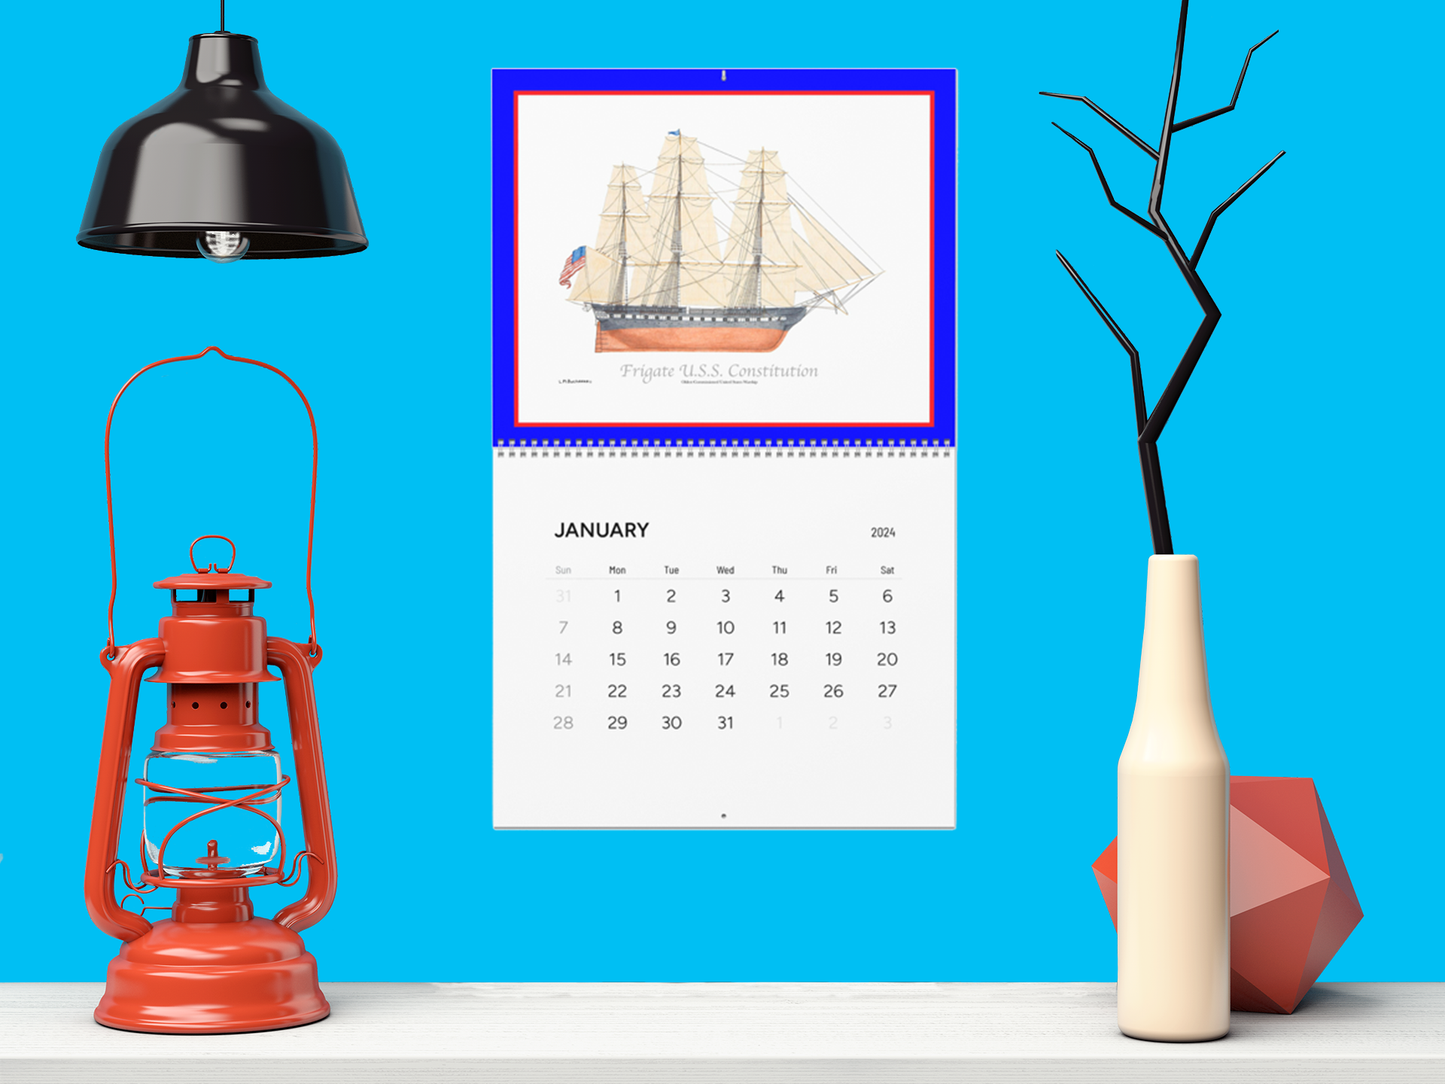 Coast and Country Boats and Ships 2024 Calendar